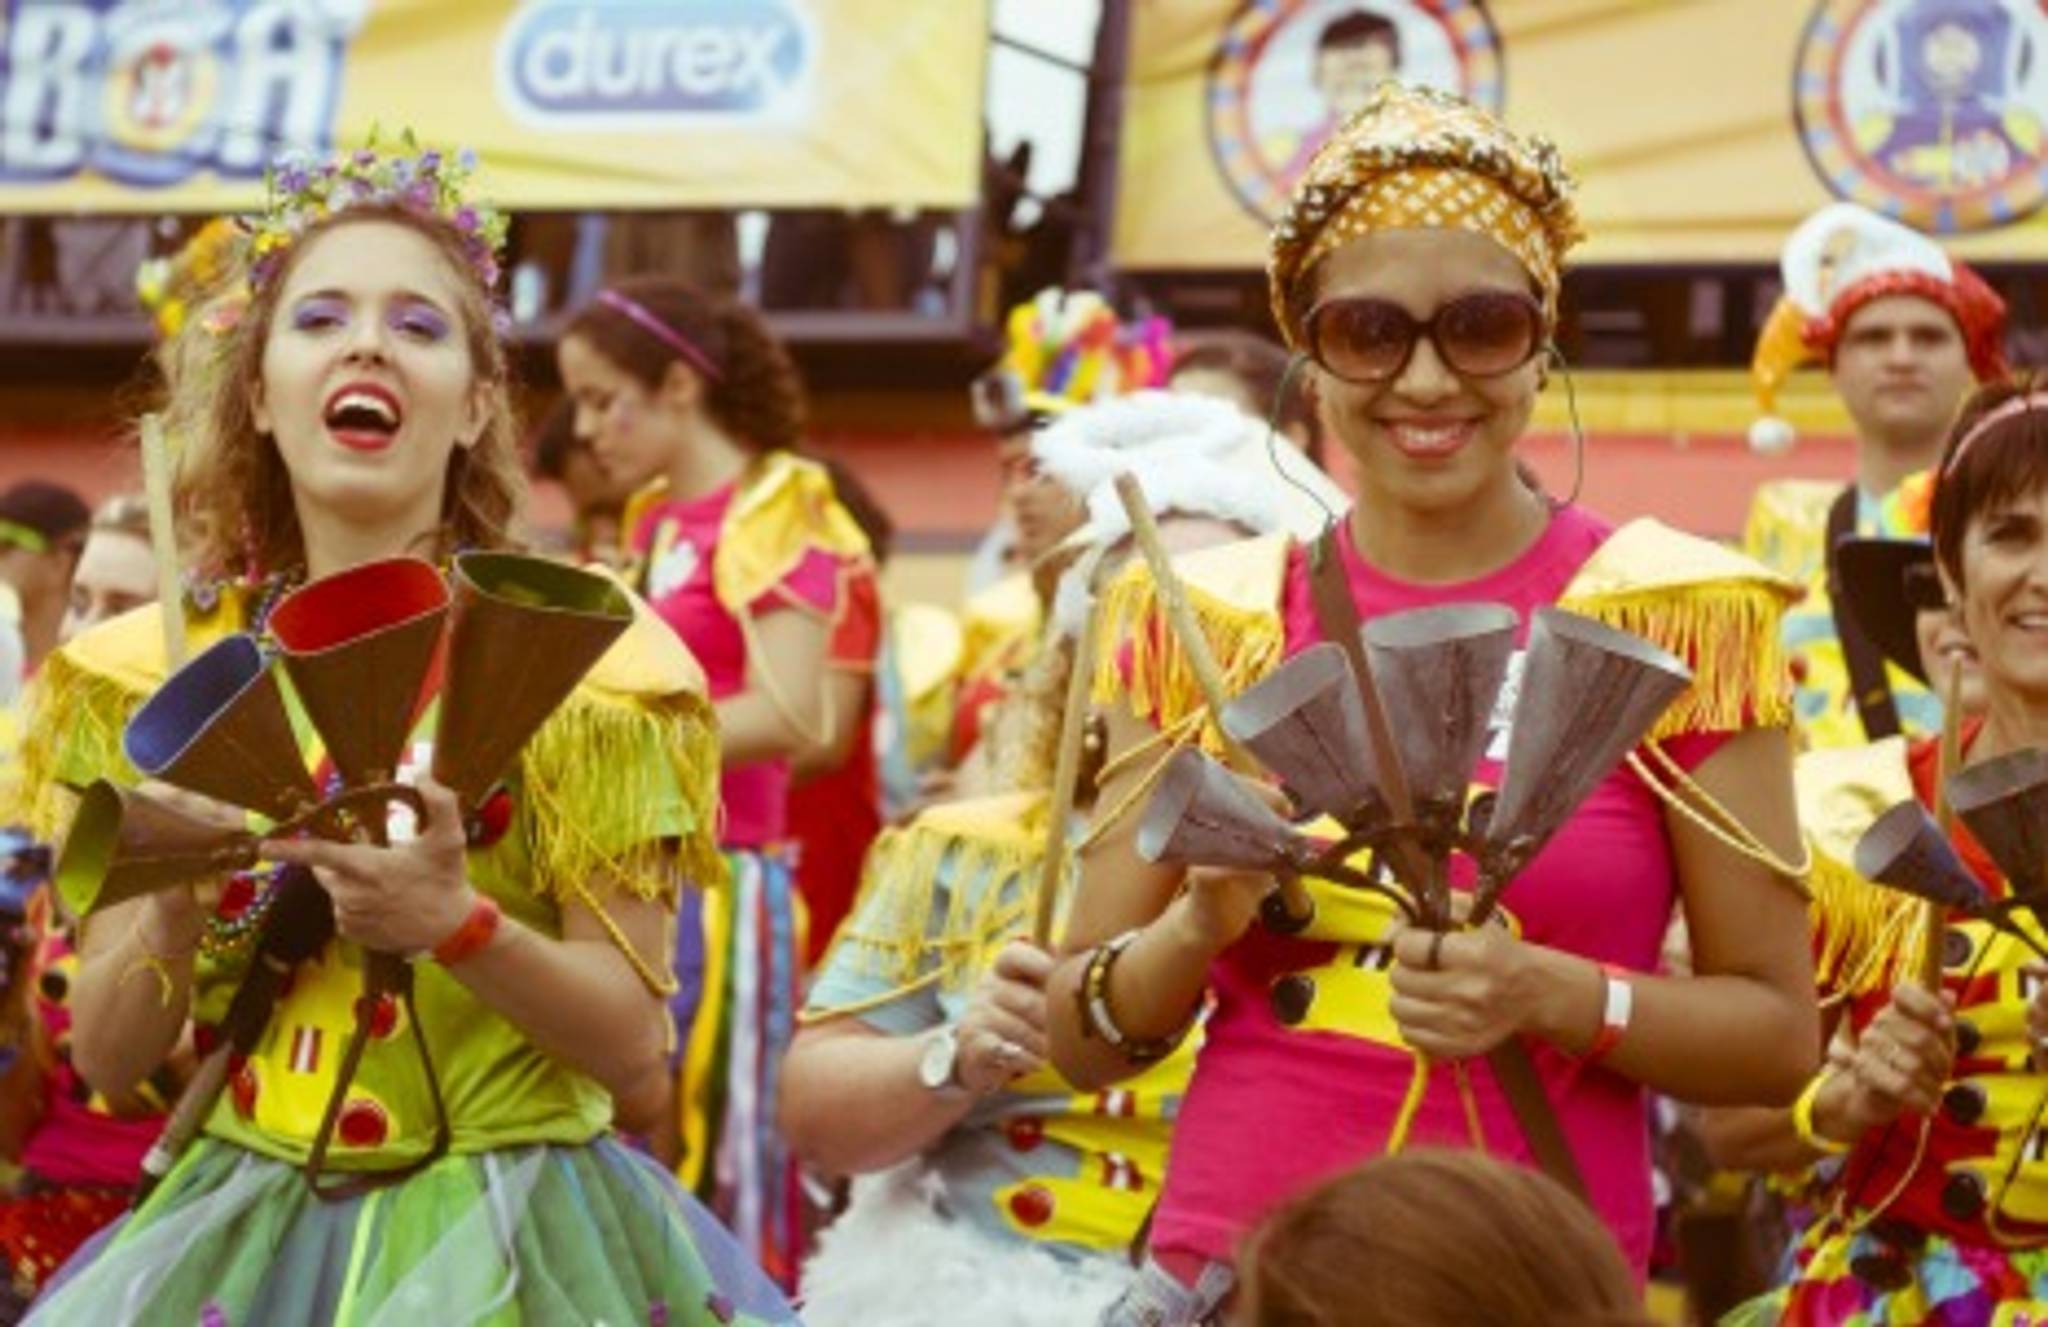 Blocos: cultural commentary at Carnival